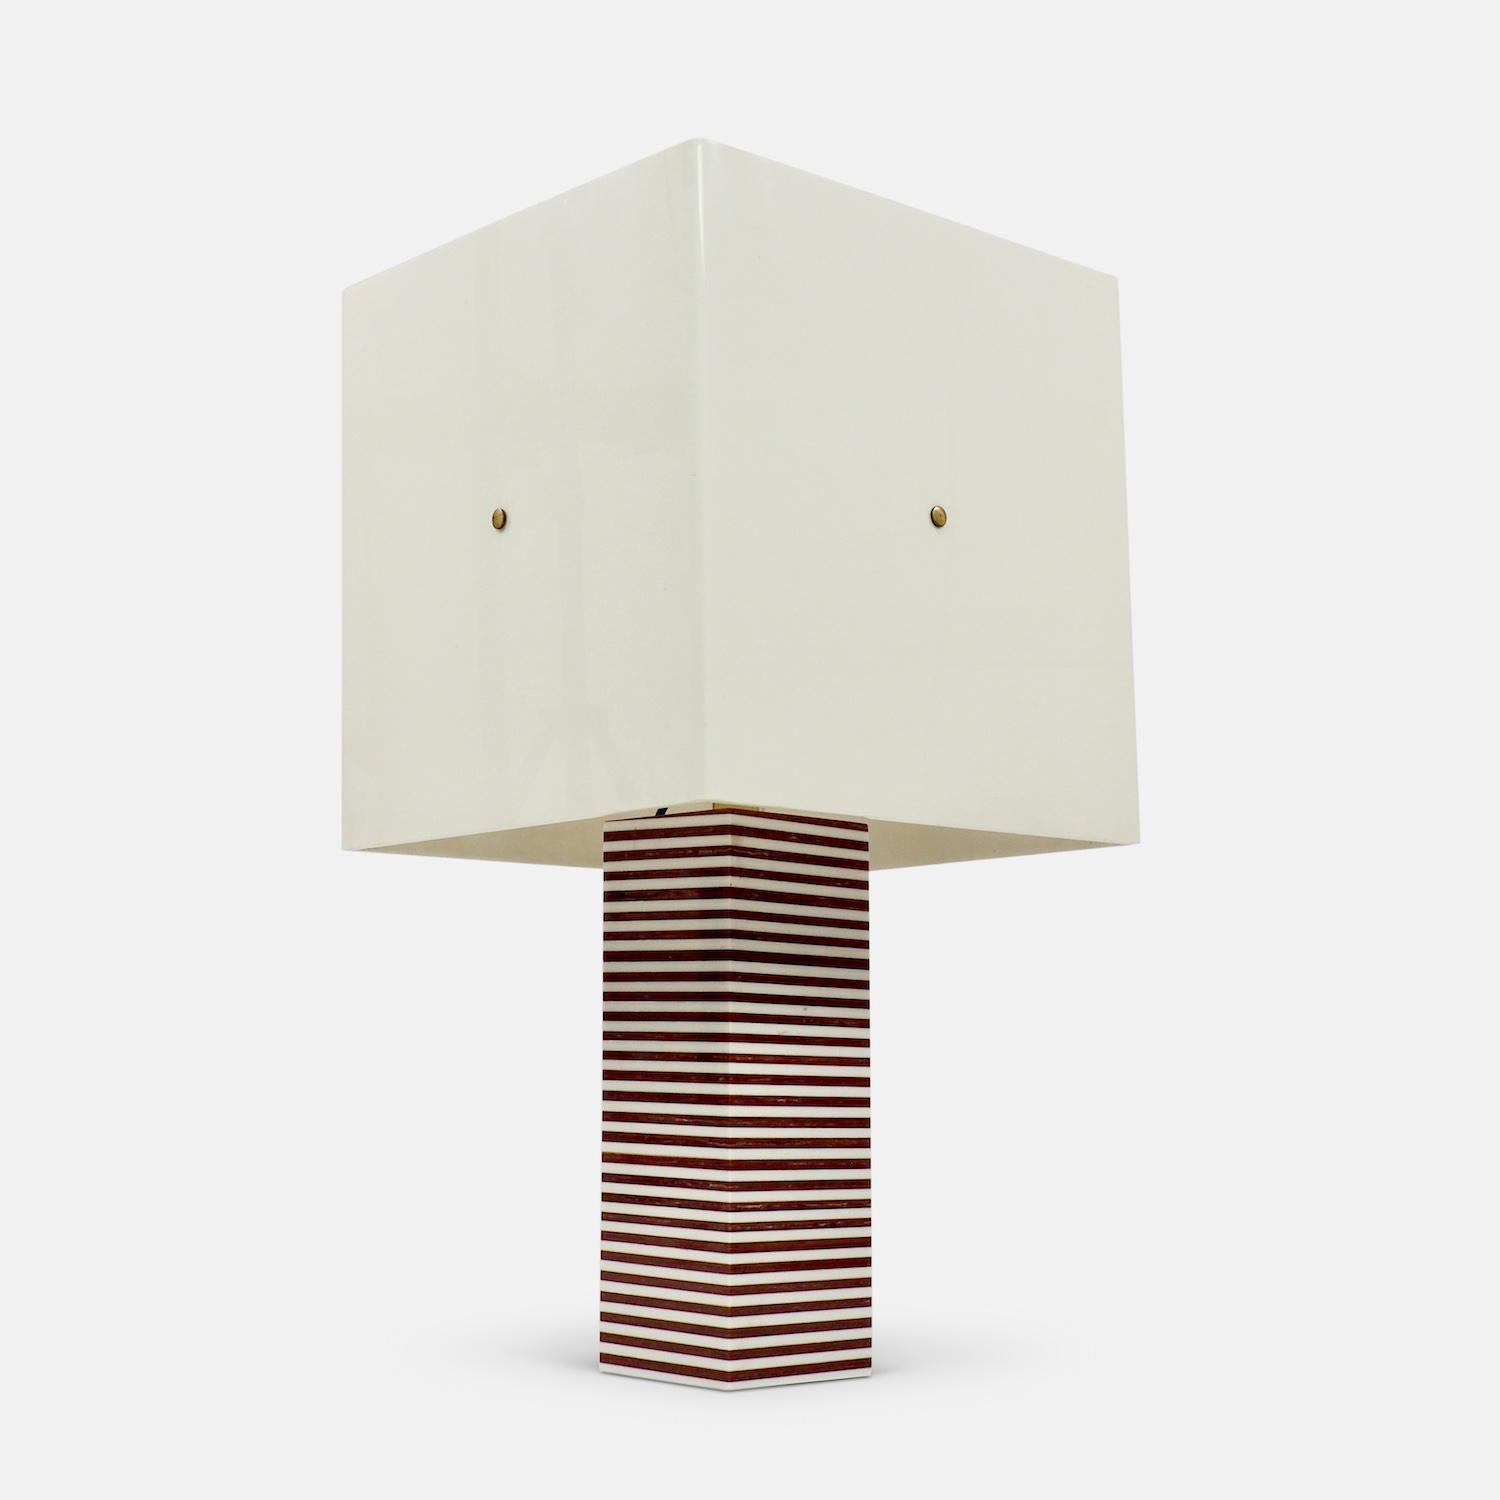 Stylish Italian striped acrylic 1970s table lamp of contrasting marbled layers in geometric form with original matching brass-mounted white acrylic shade in the style of Romeo Rega. Rectangular column of alternately layered ivory and umber colored